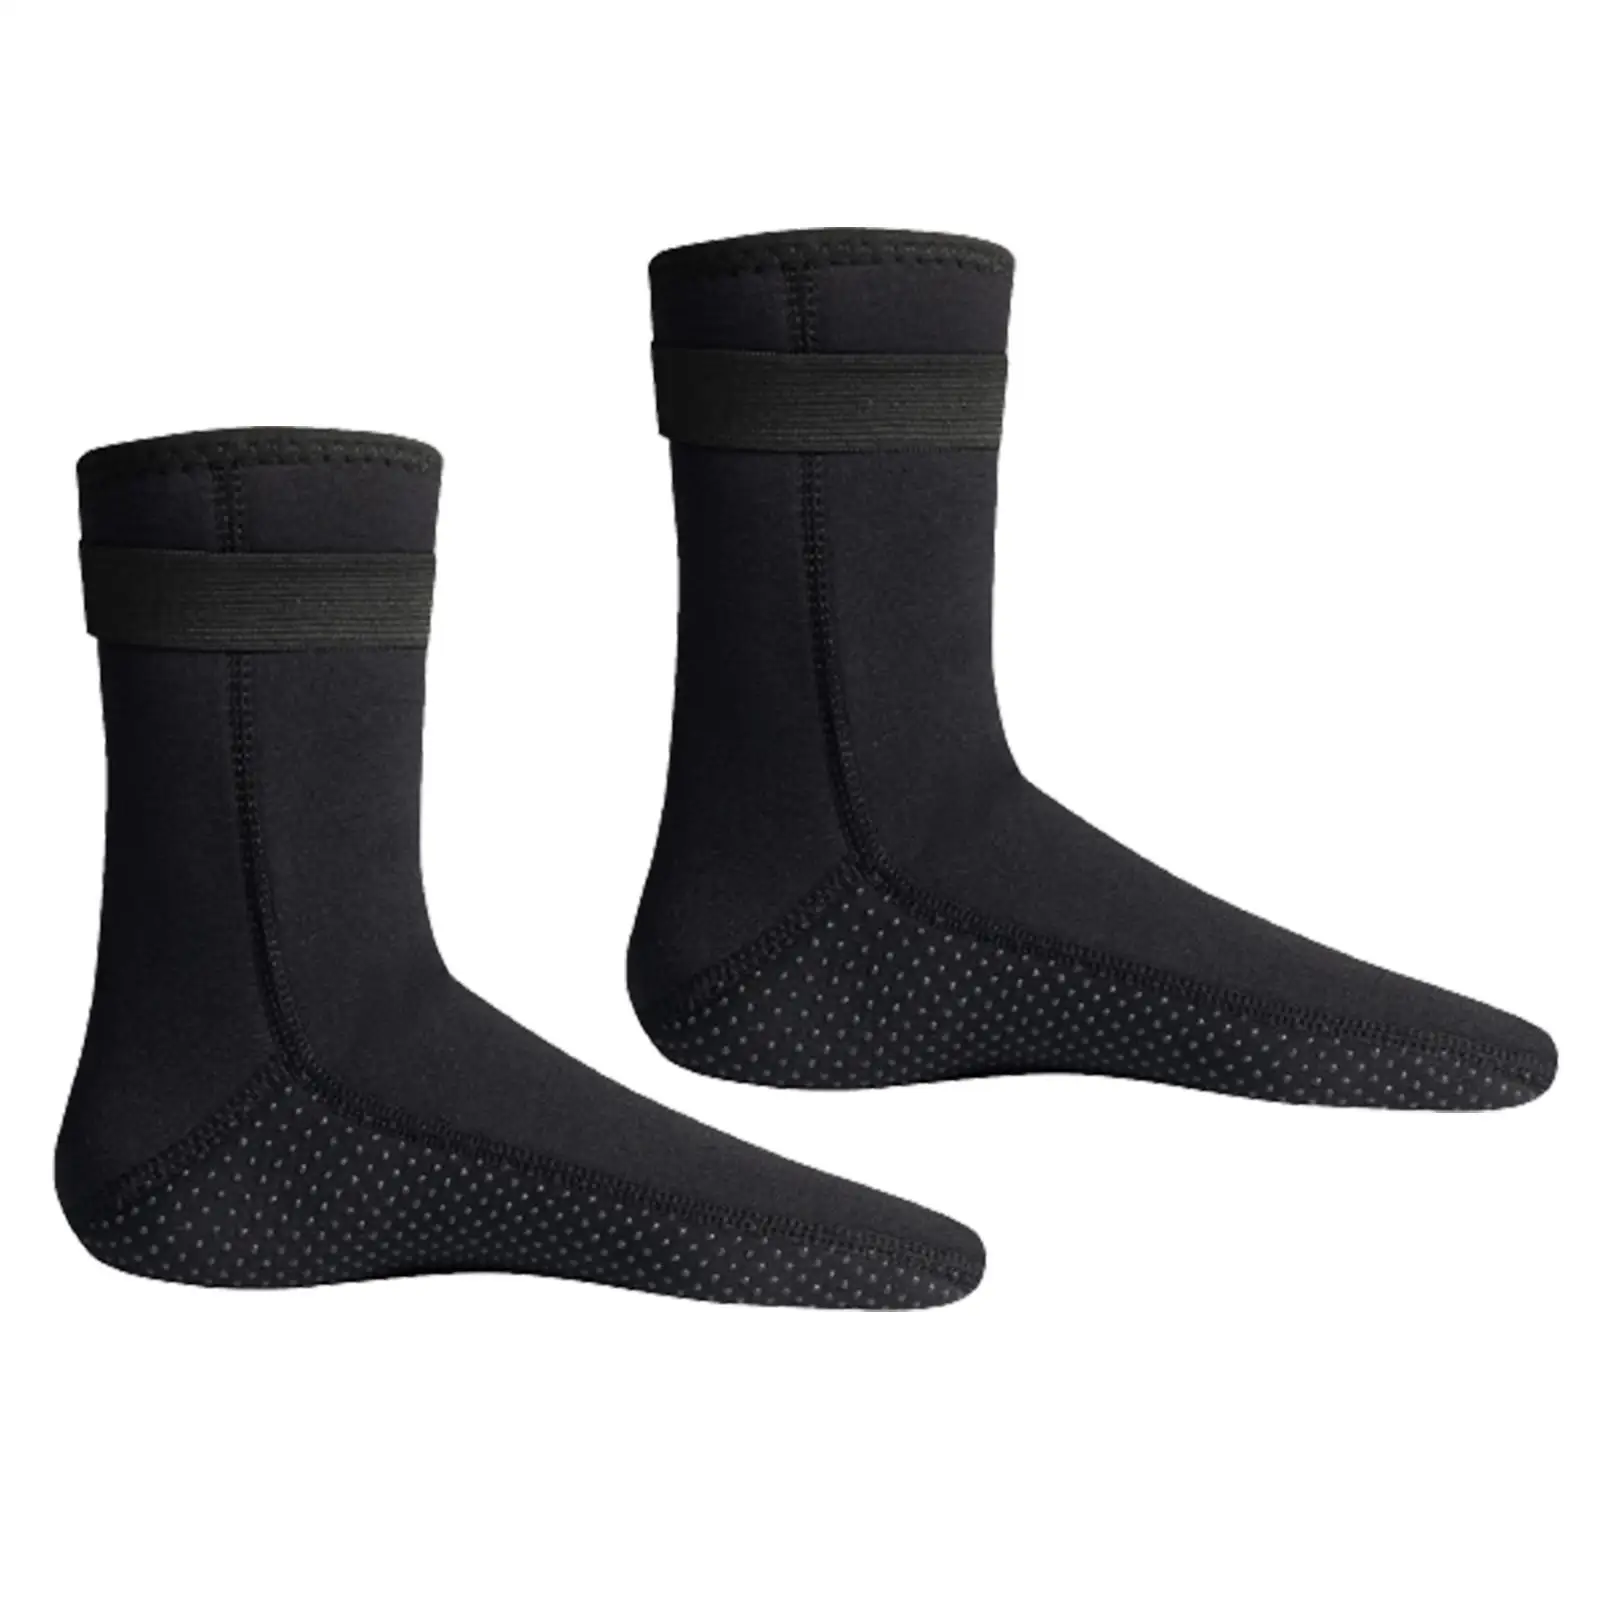 Neoprene Diving Socks Dive Boots Warm Surfing Sock Swimming Socks for Paddling Sailing Rafting Water Sports Activities